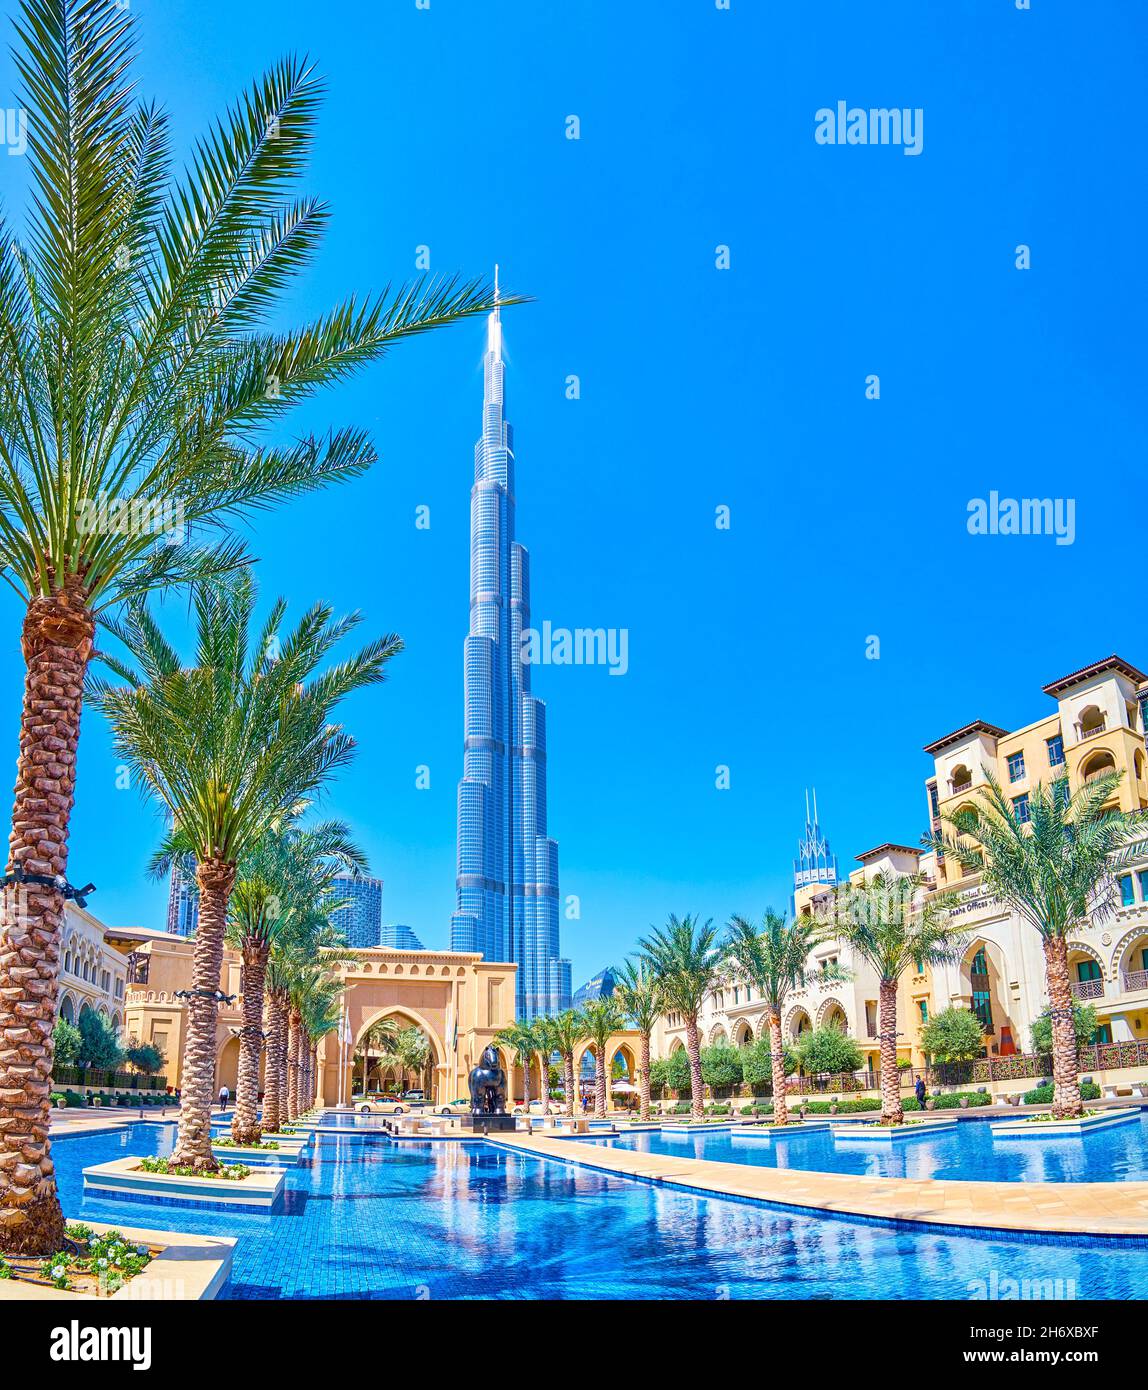 DUBAI, UAE - MARCH 3, 2020: The famous tourist attraction Burj Khalifa and luxury Old Town Island complex in traditional Arabic style, on March 3 in D Stock Photo